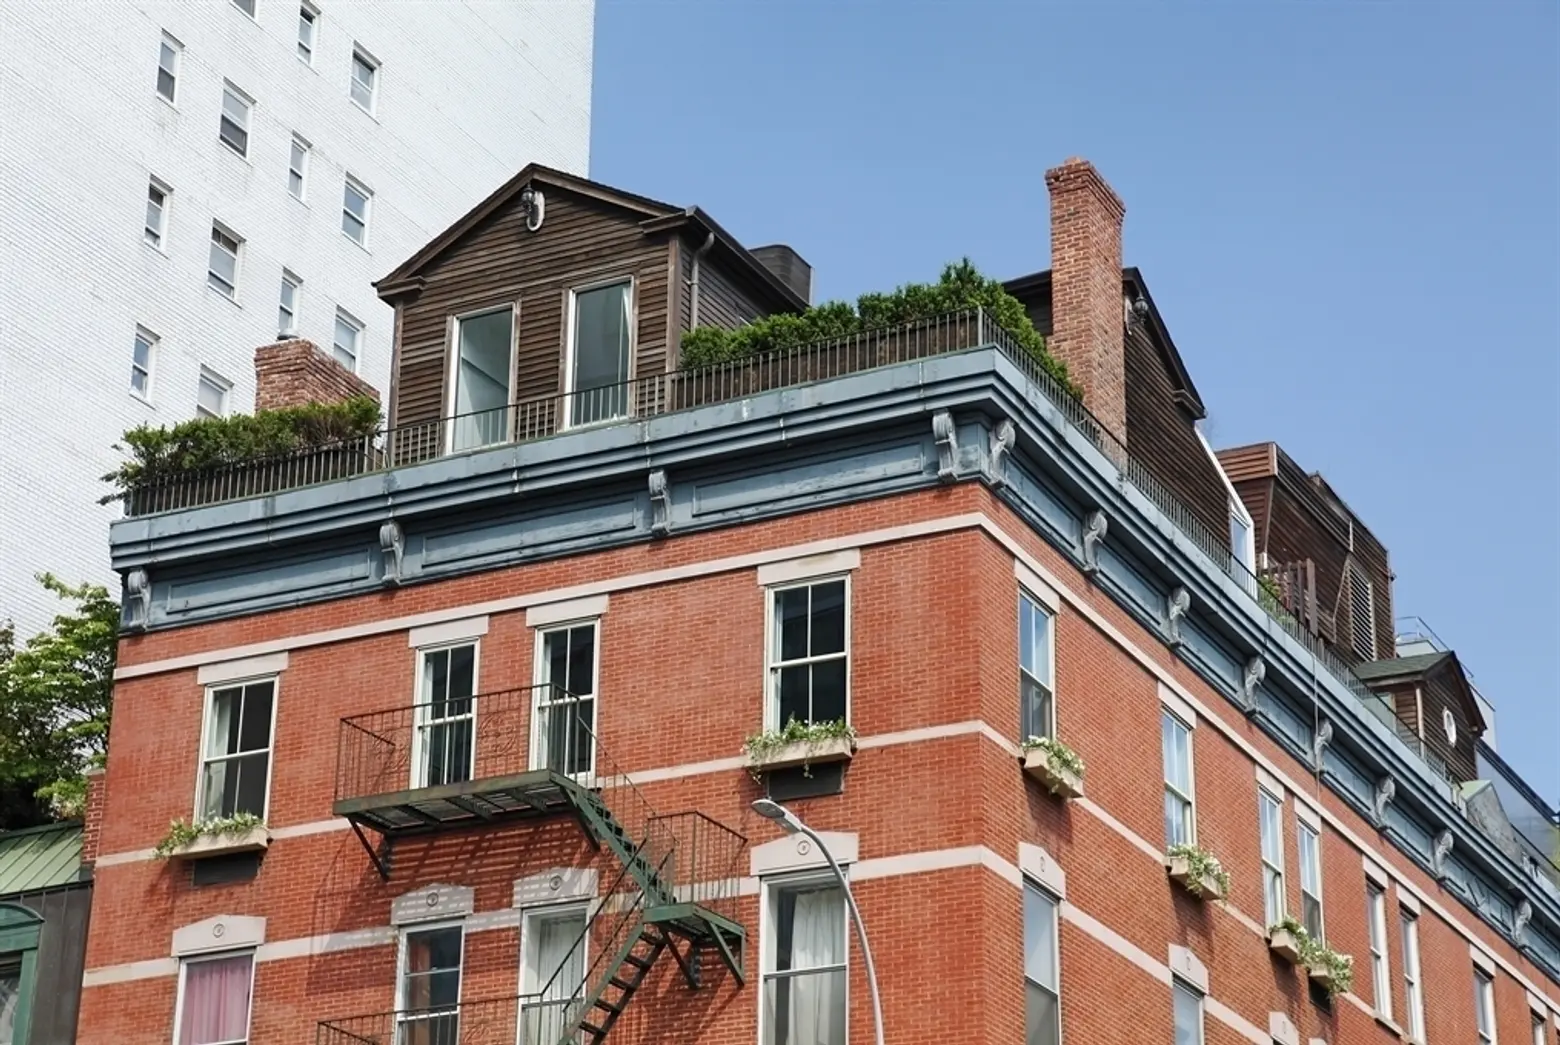 203 East 13th Street, 7 Harrison Street, penthouse, rooftop garden, cool listings, manhattan real estate, tribeca, east village, high and low, rooftop cottage